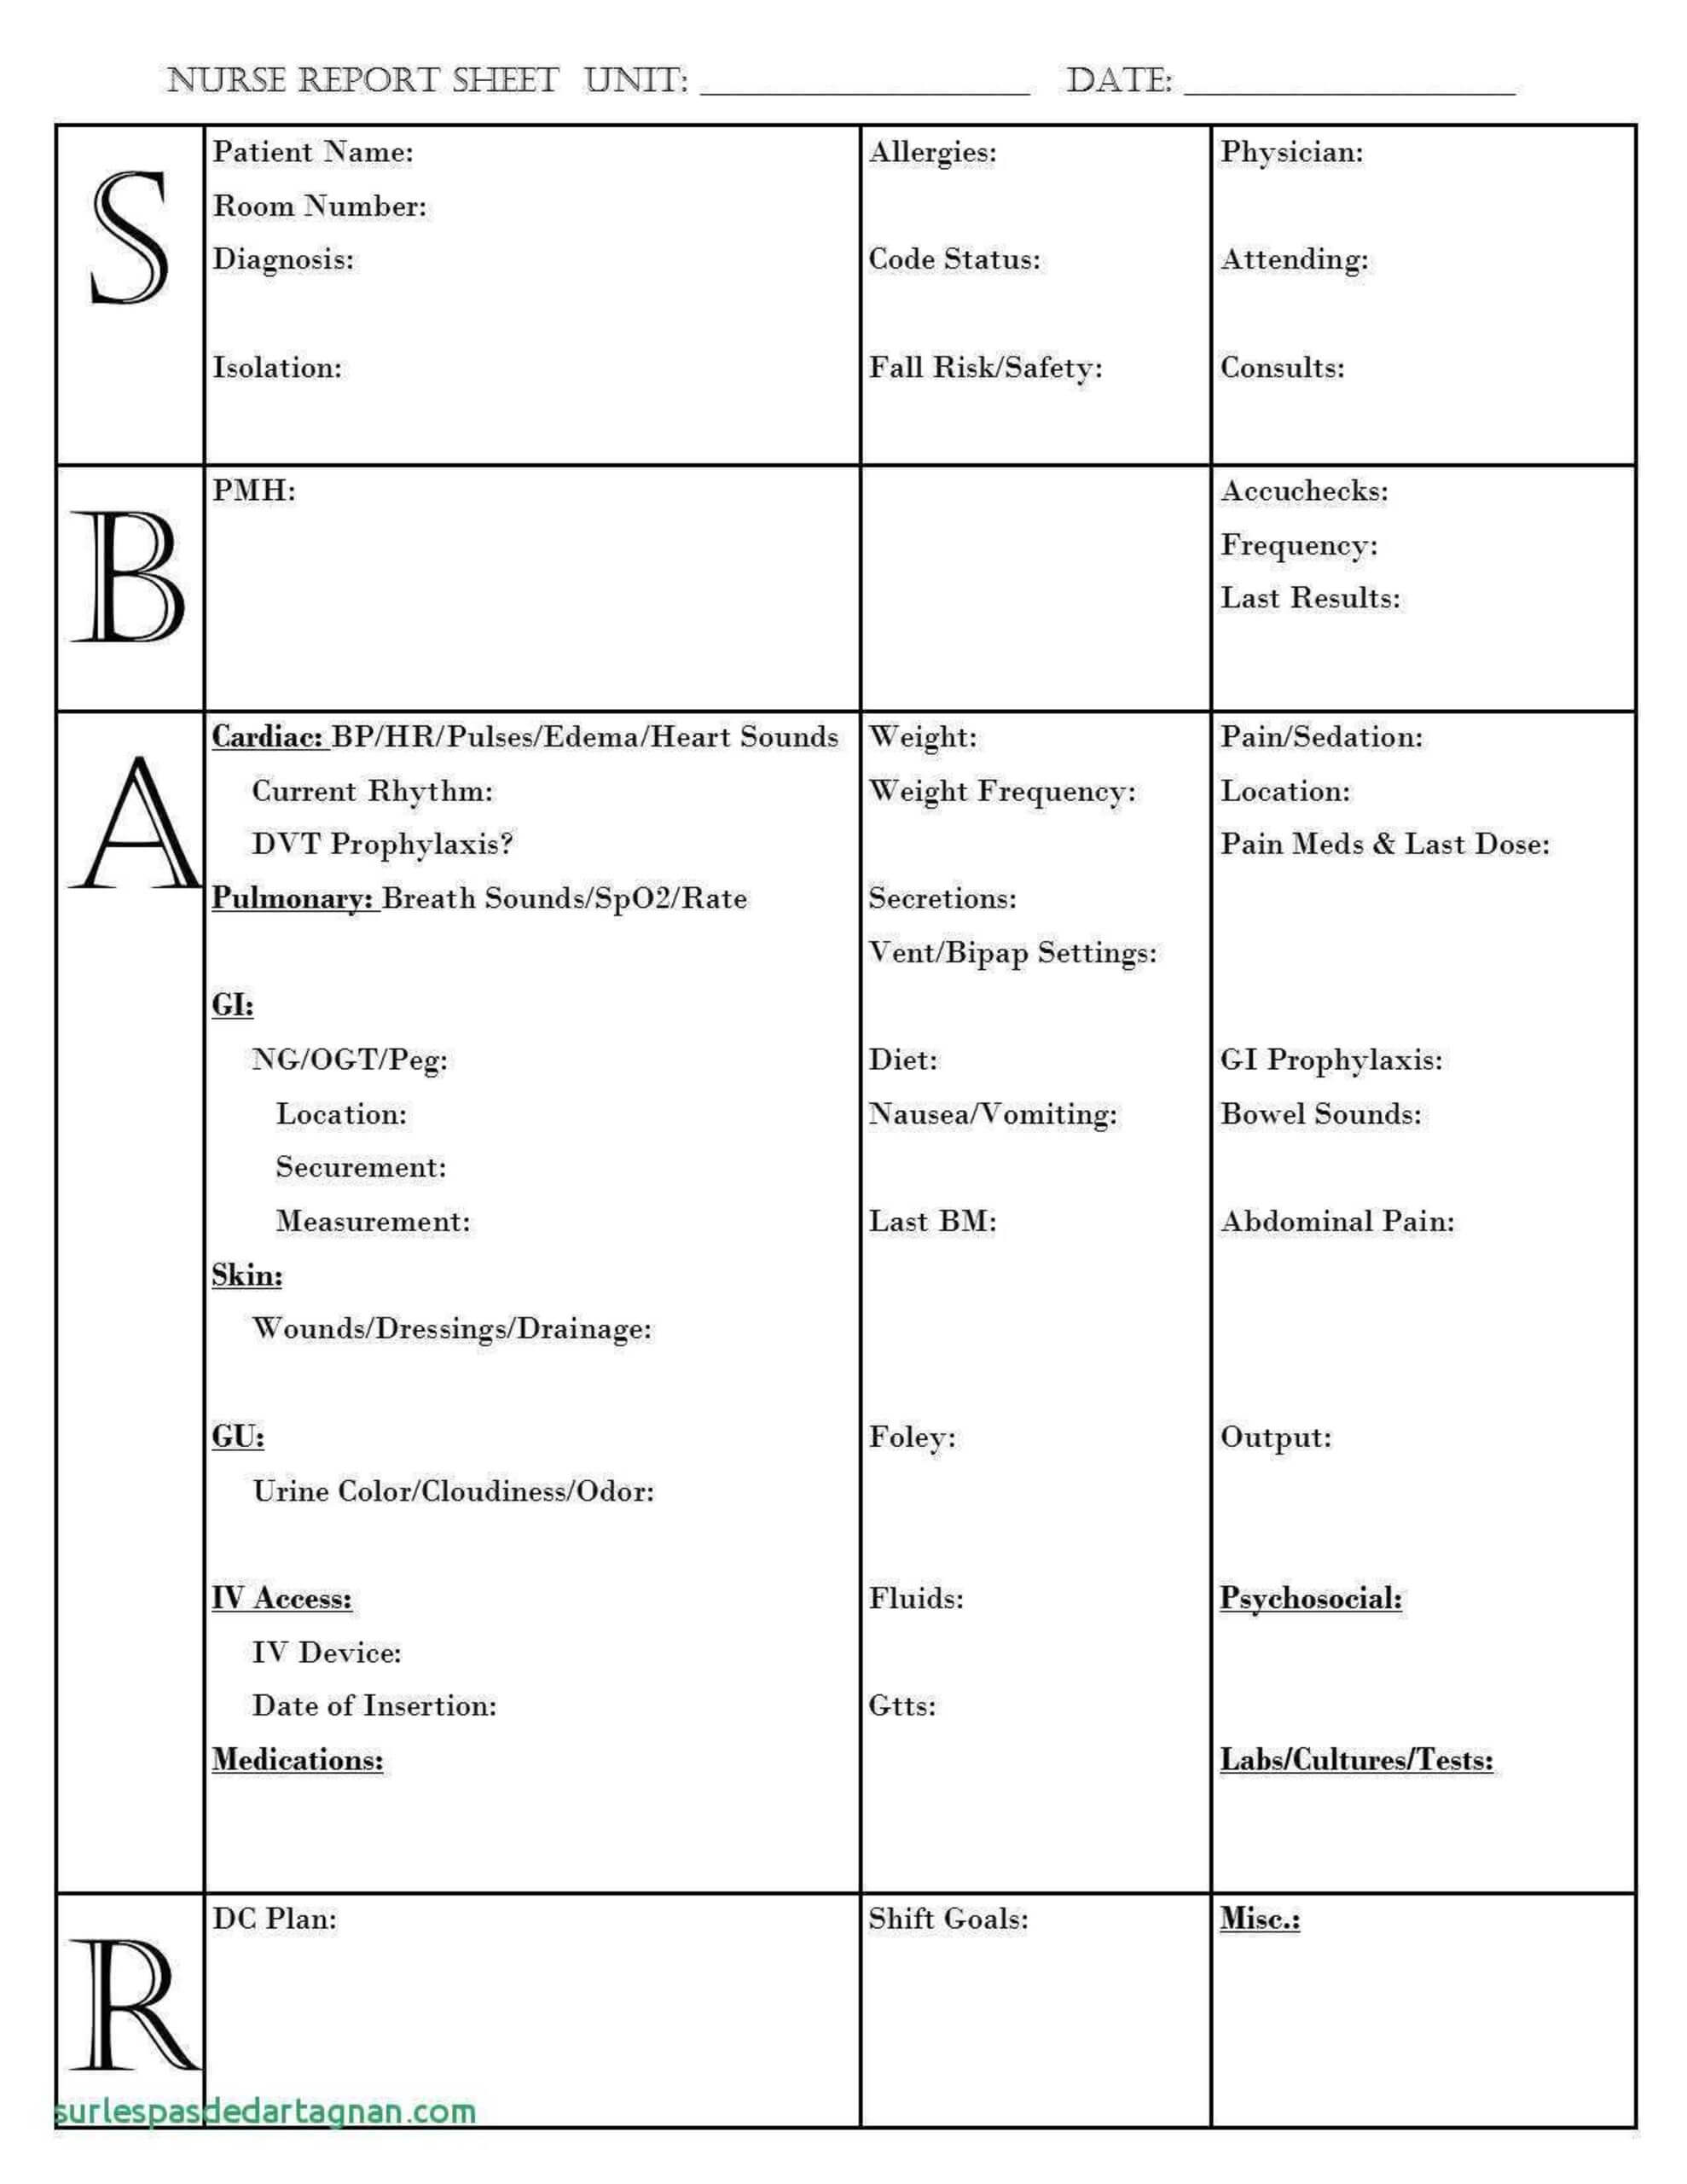 Ca585165 Nursing Report Sheet Template Together With Sbar With Regard To Nurse Report Template